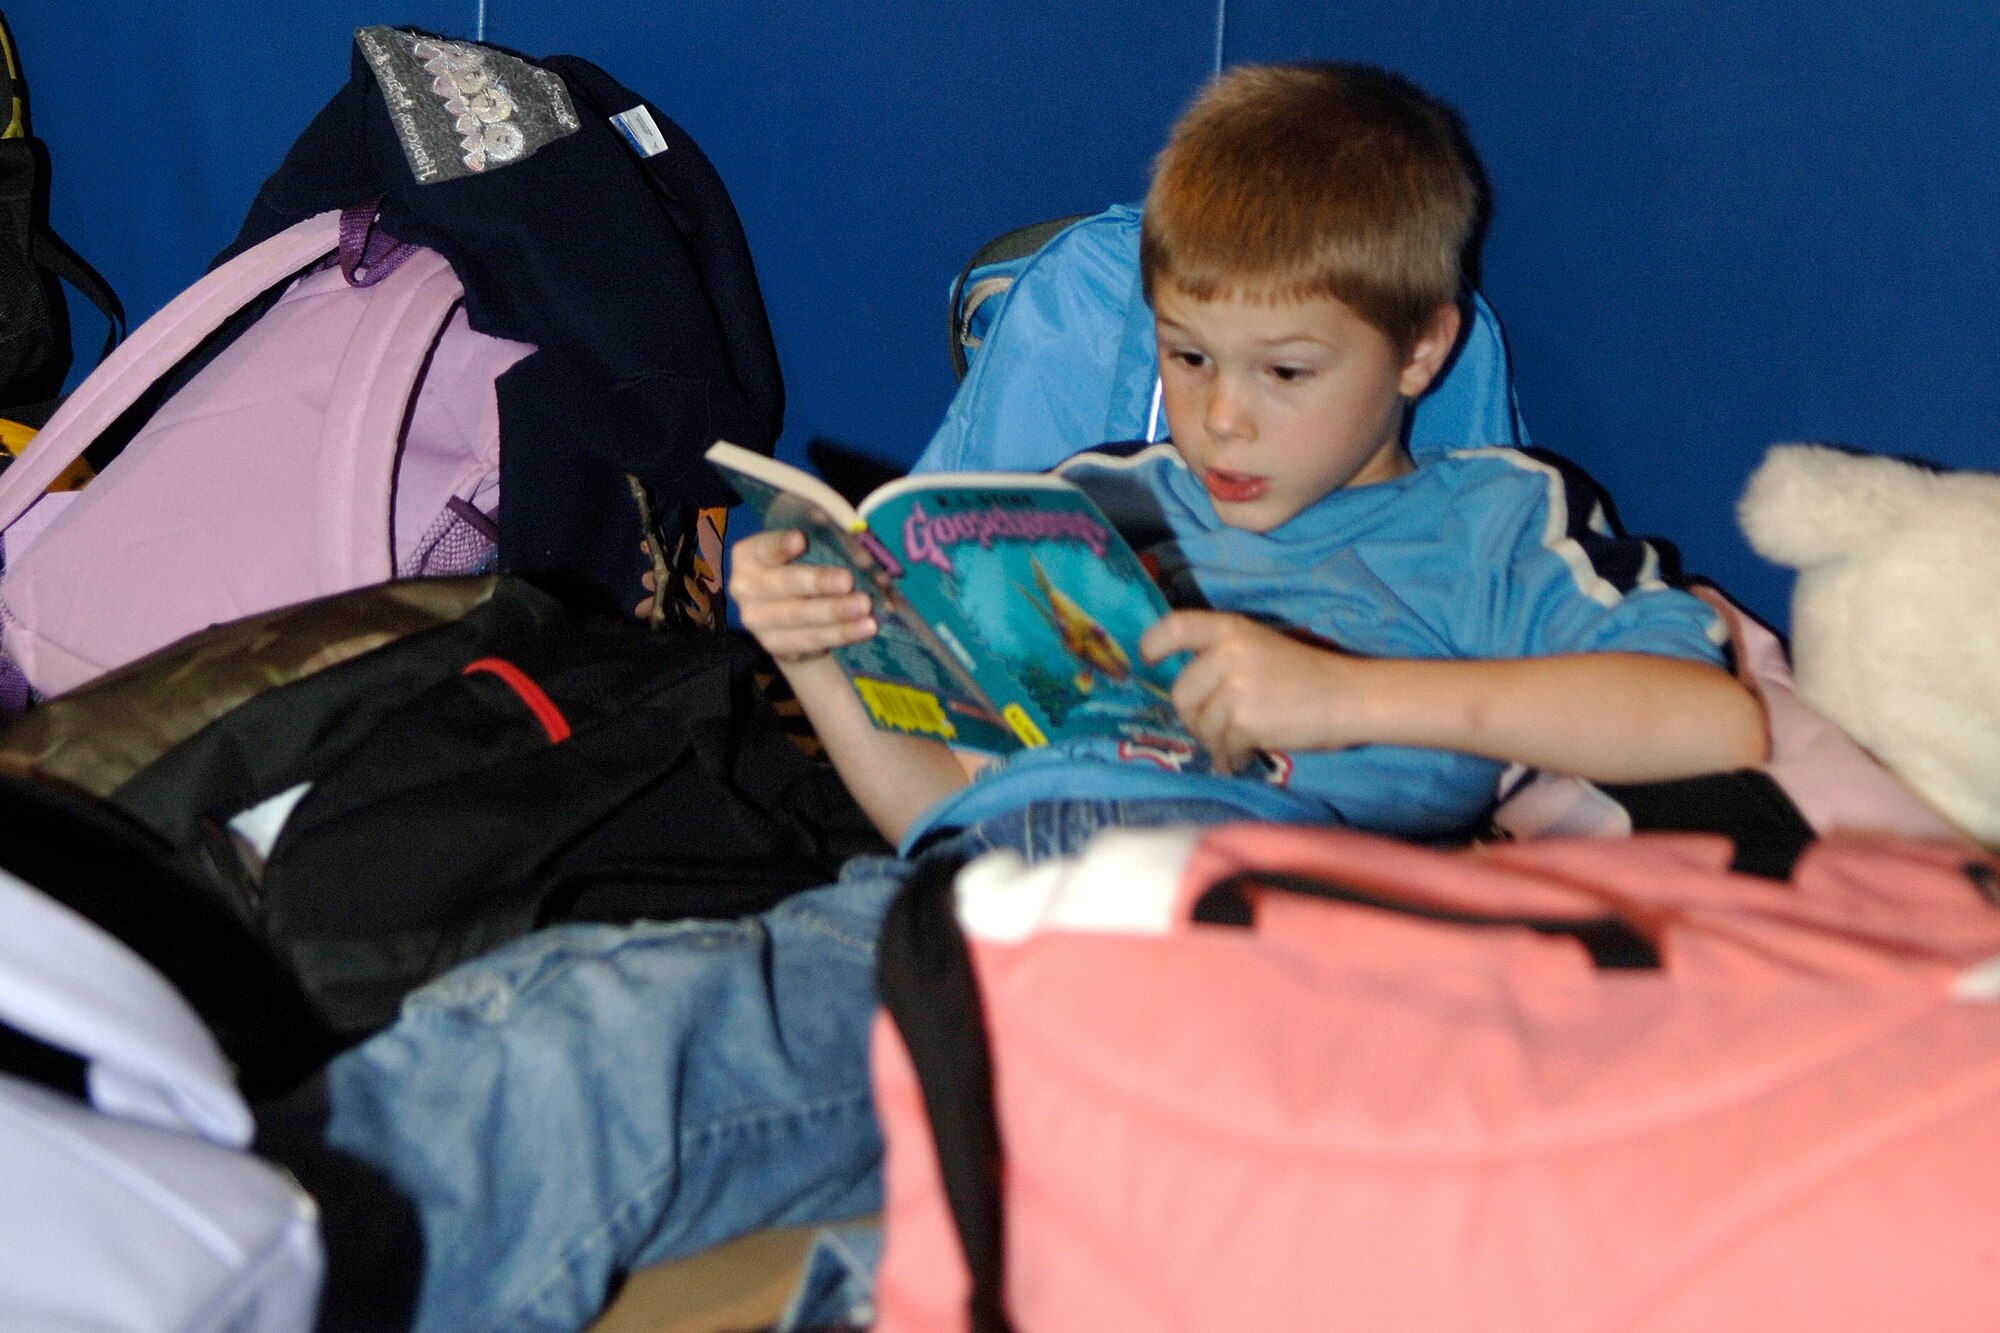 HANSCOM AFB, Mass. -- Orion Griffin, school age program, sits among backpacks to read a hair-raising story at the Base Youth Center during the Lights on Afterschool event Oct. 18. (U.S. Air Force photo by Jan Abate)

